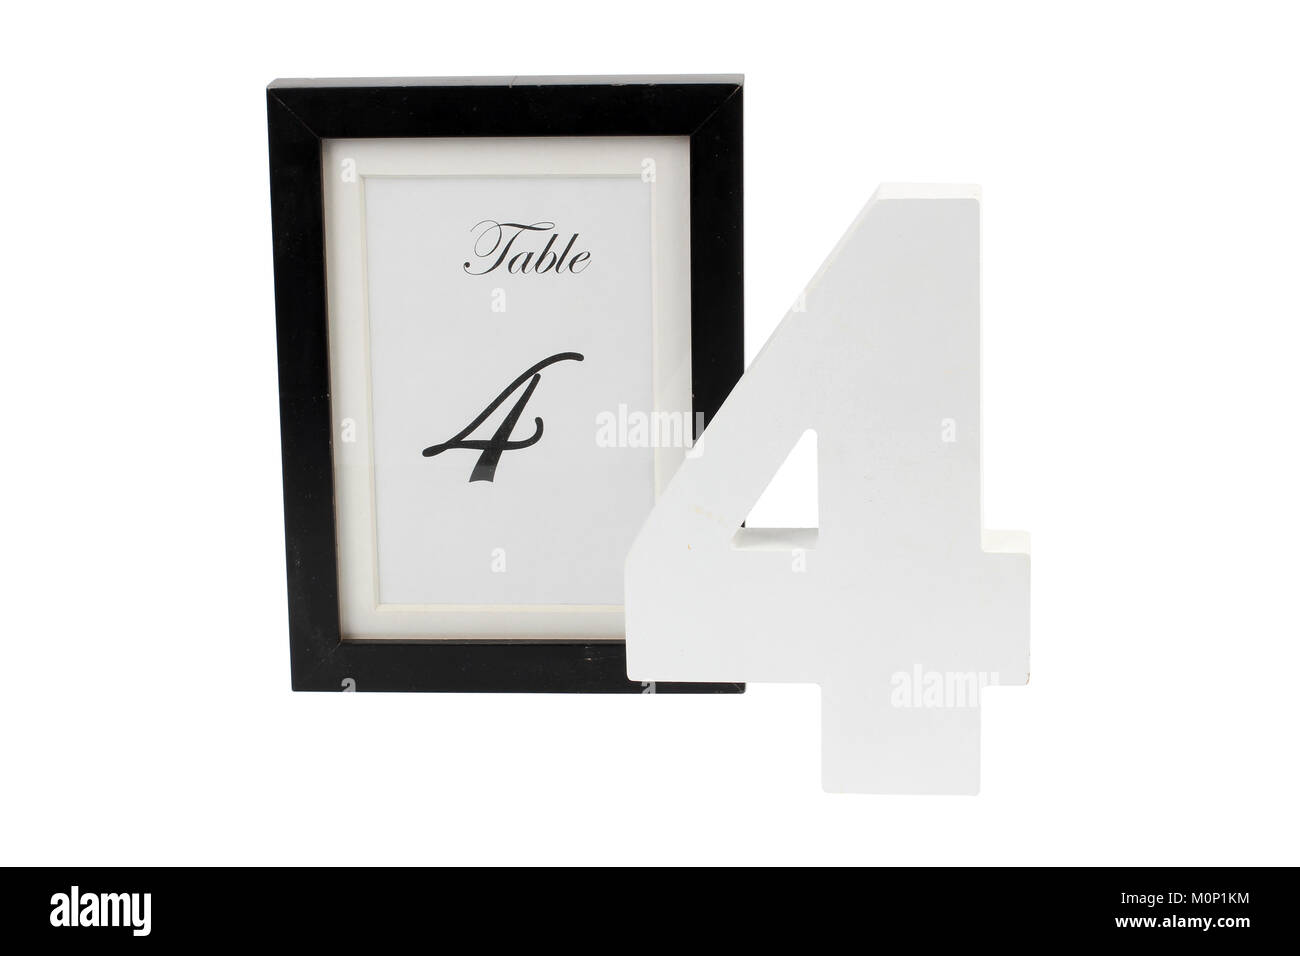 Table Number in Black Frame on Plain Background Stock Photo